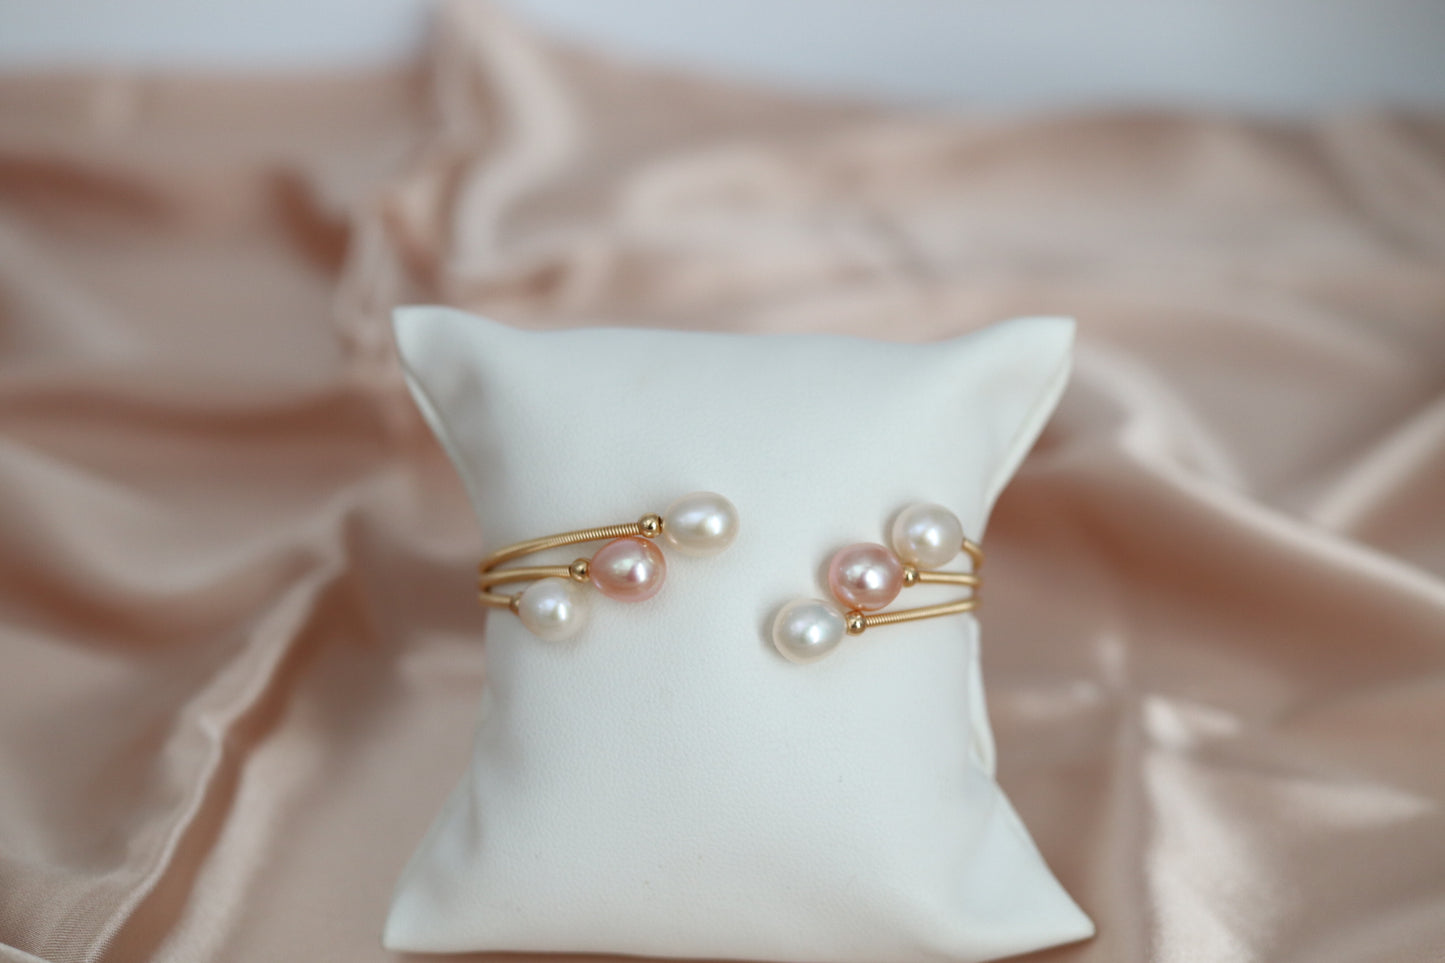 Six Fresh White and Light Pink Water Pearls with Gold Filled Wiring